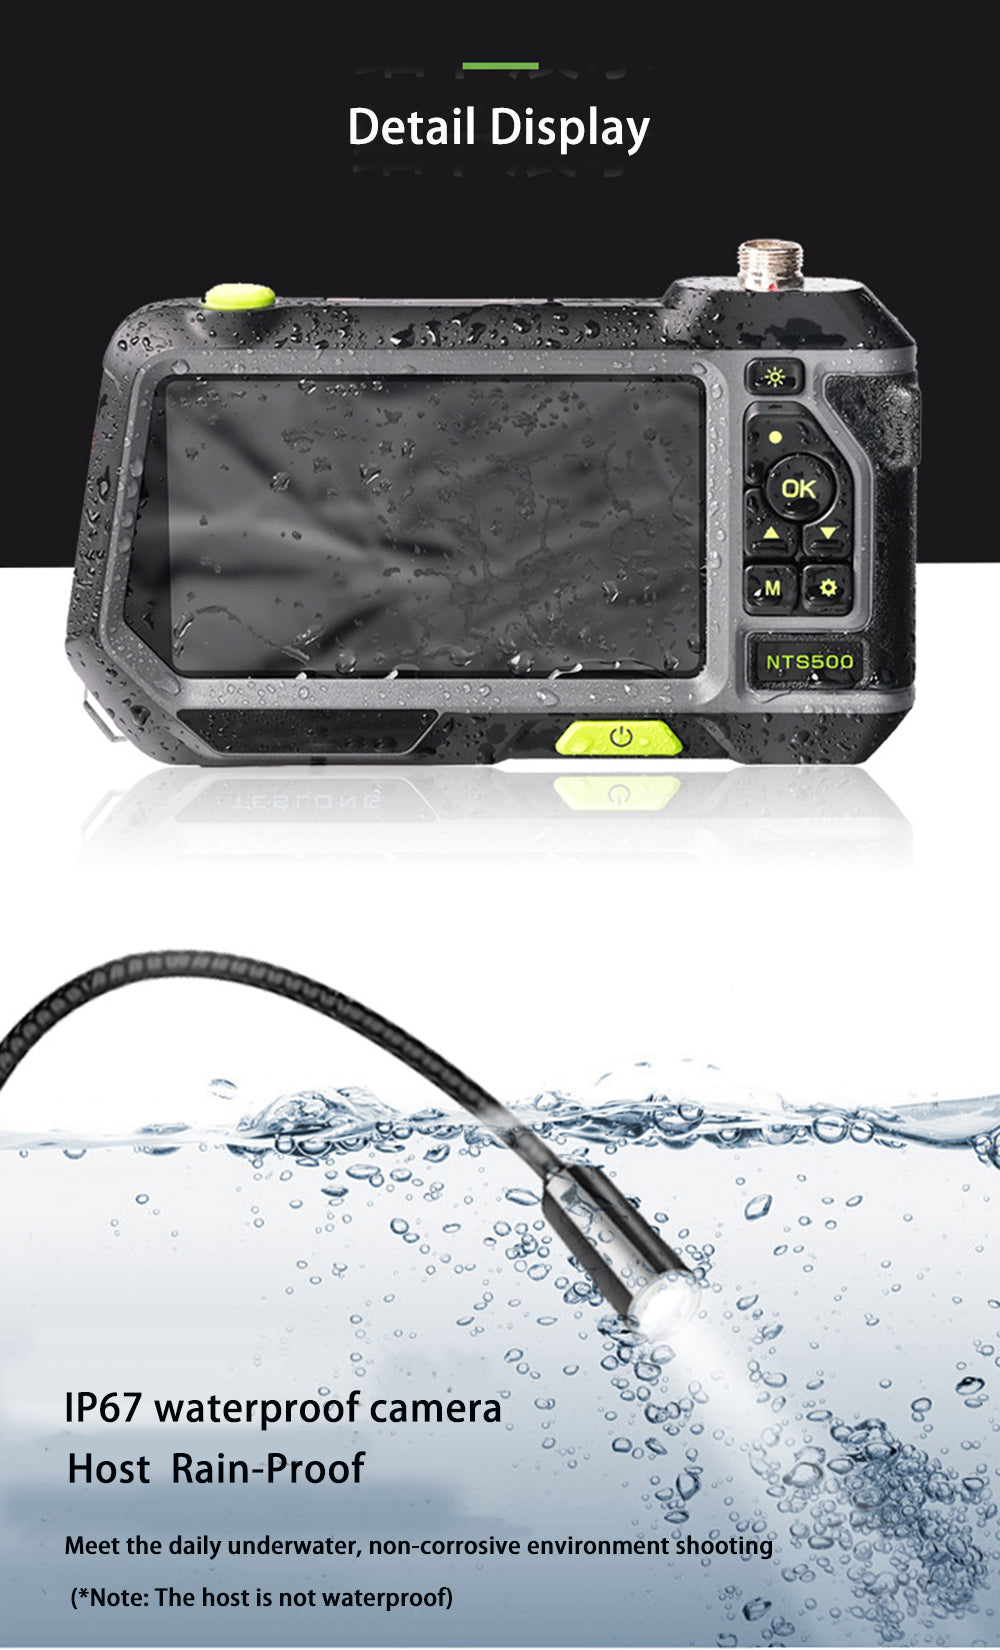 Teslong NTS500 Dual-Lens Inspection Camera with 5